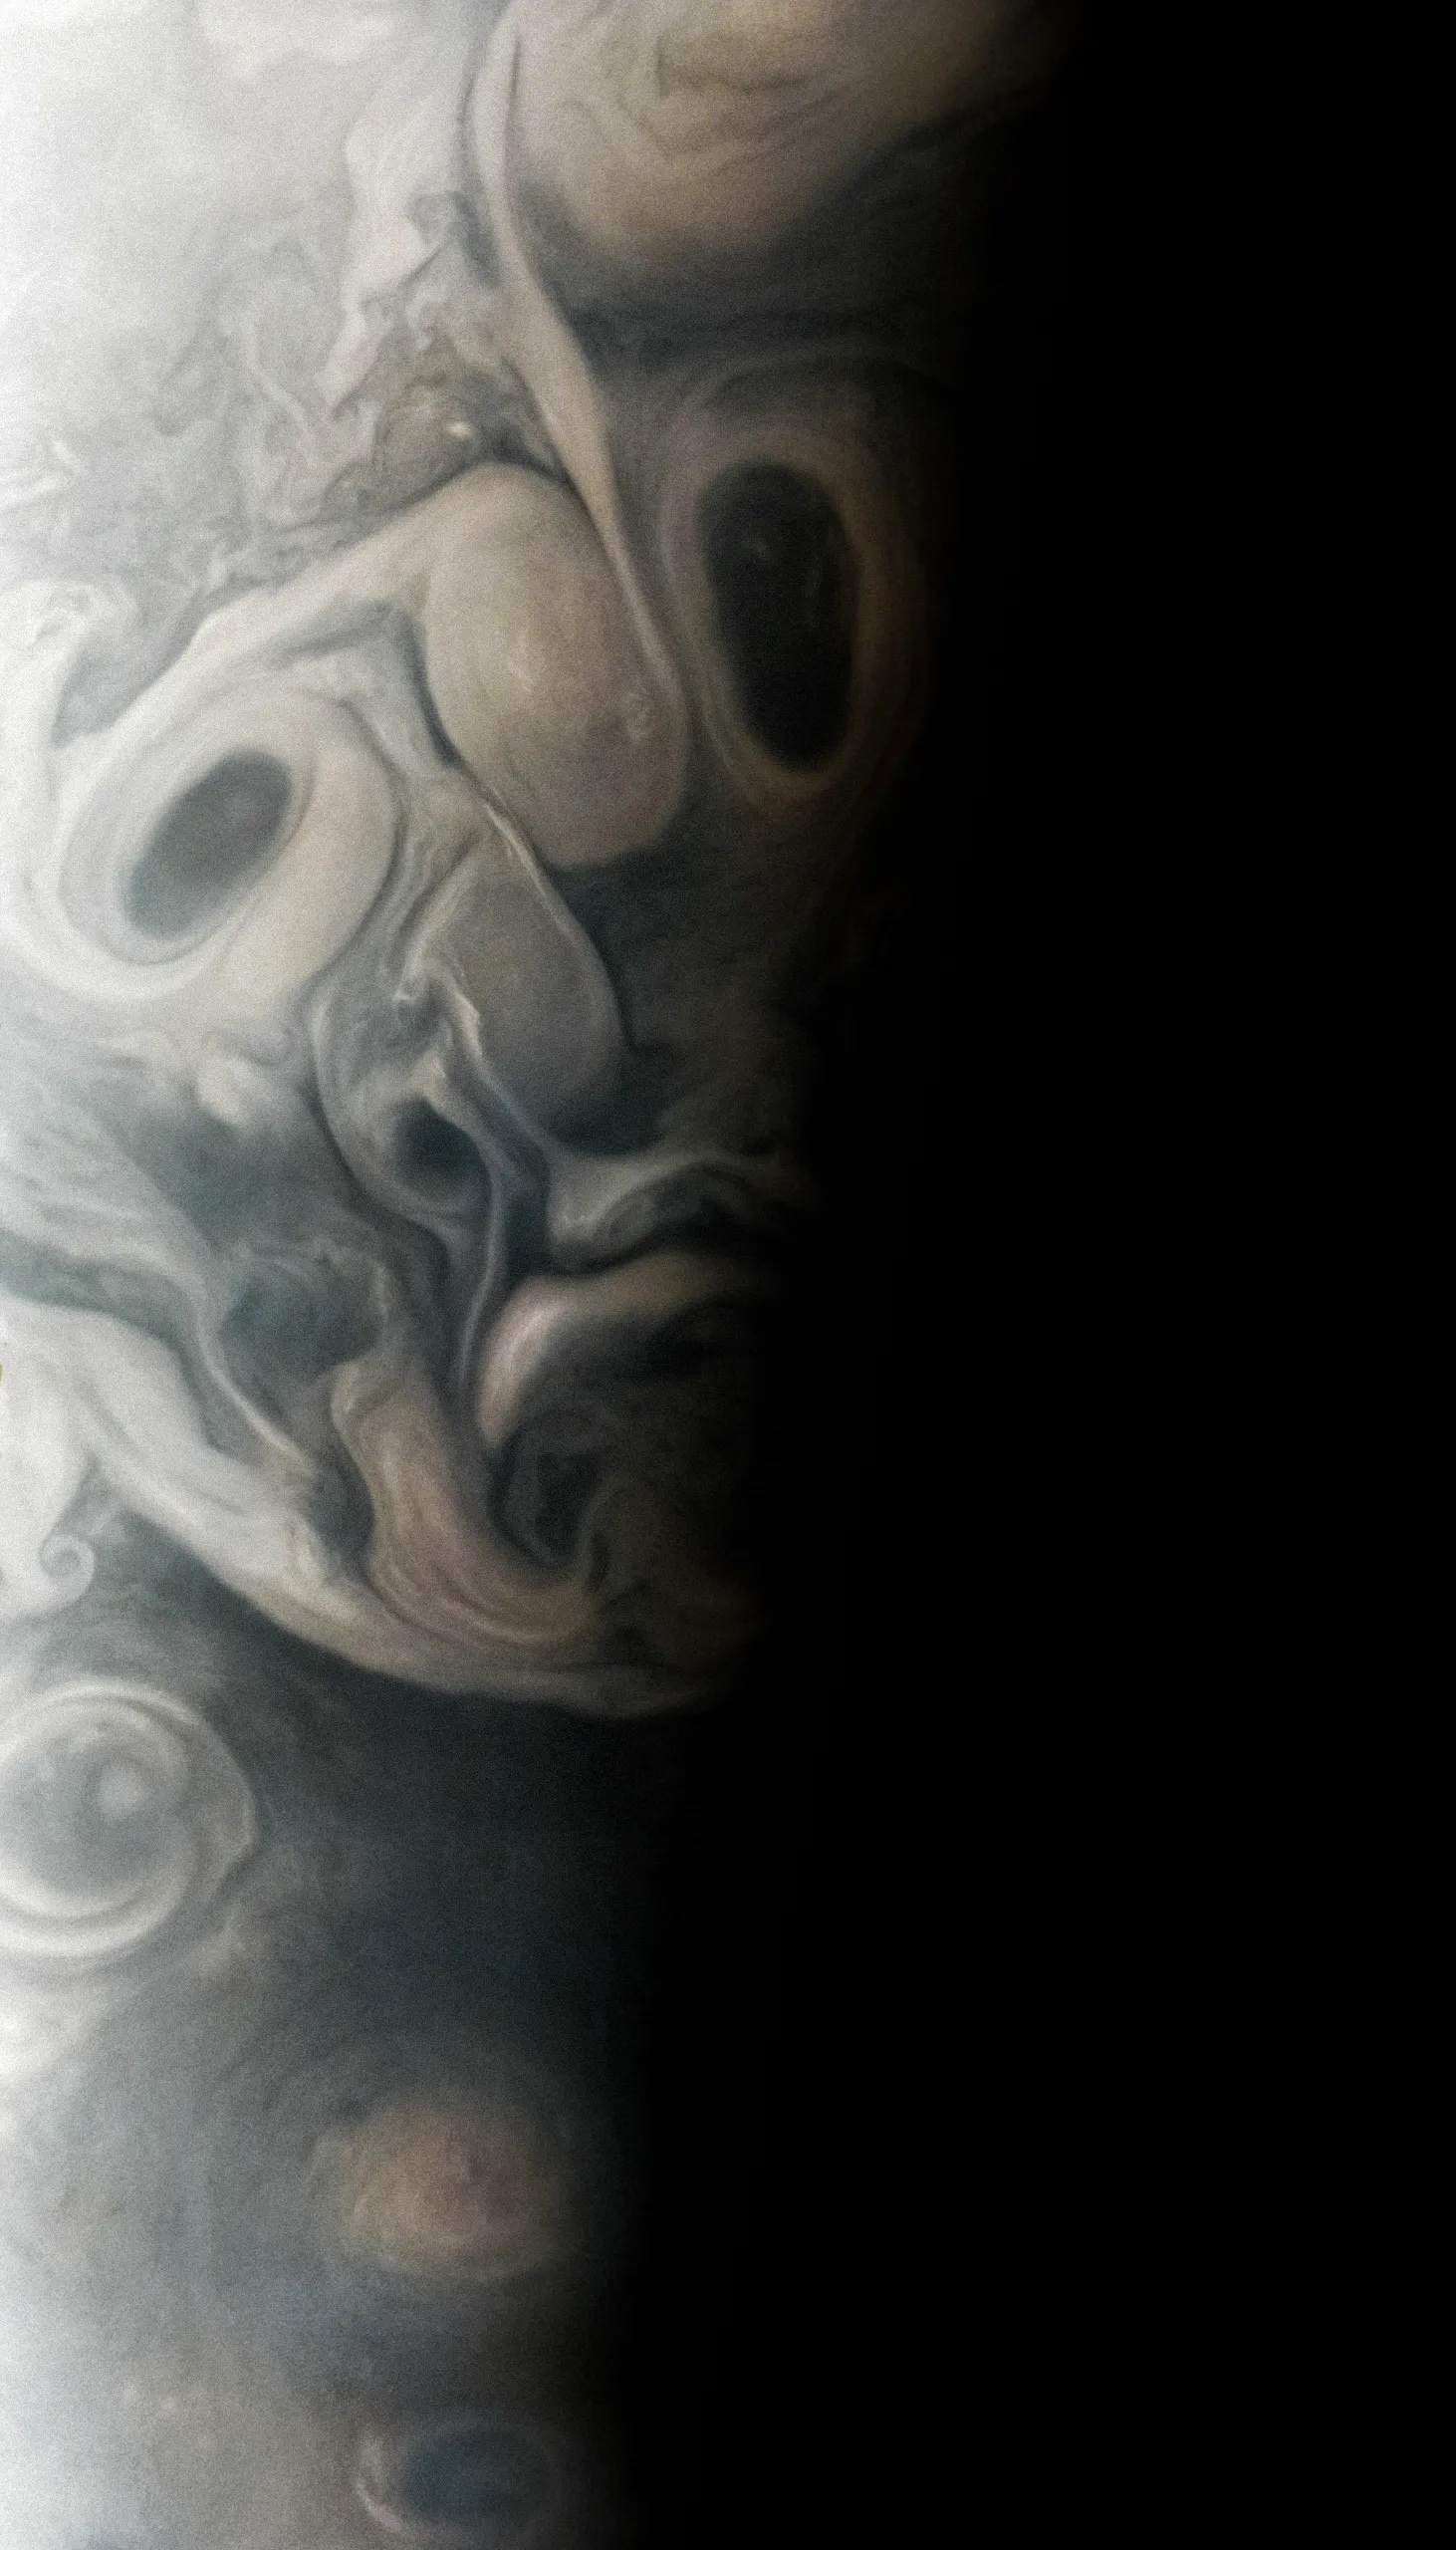 just-in-time-for-halloween-nasas-juno-mission-spots-eerie-face-on-jupiter